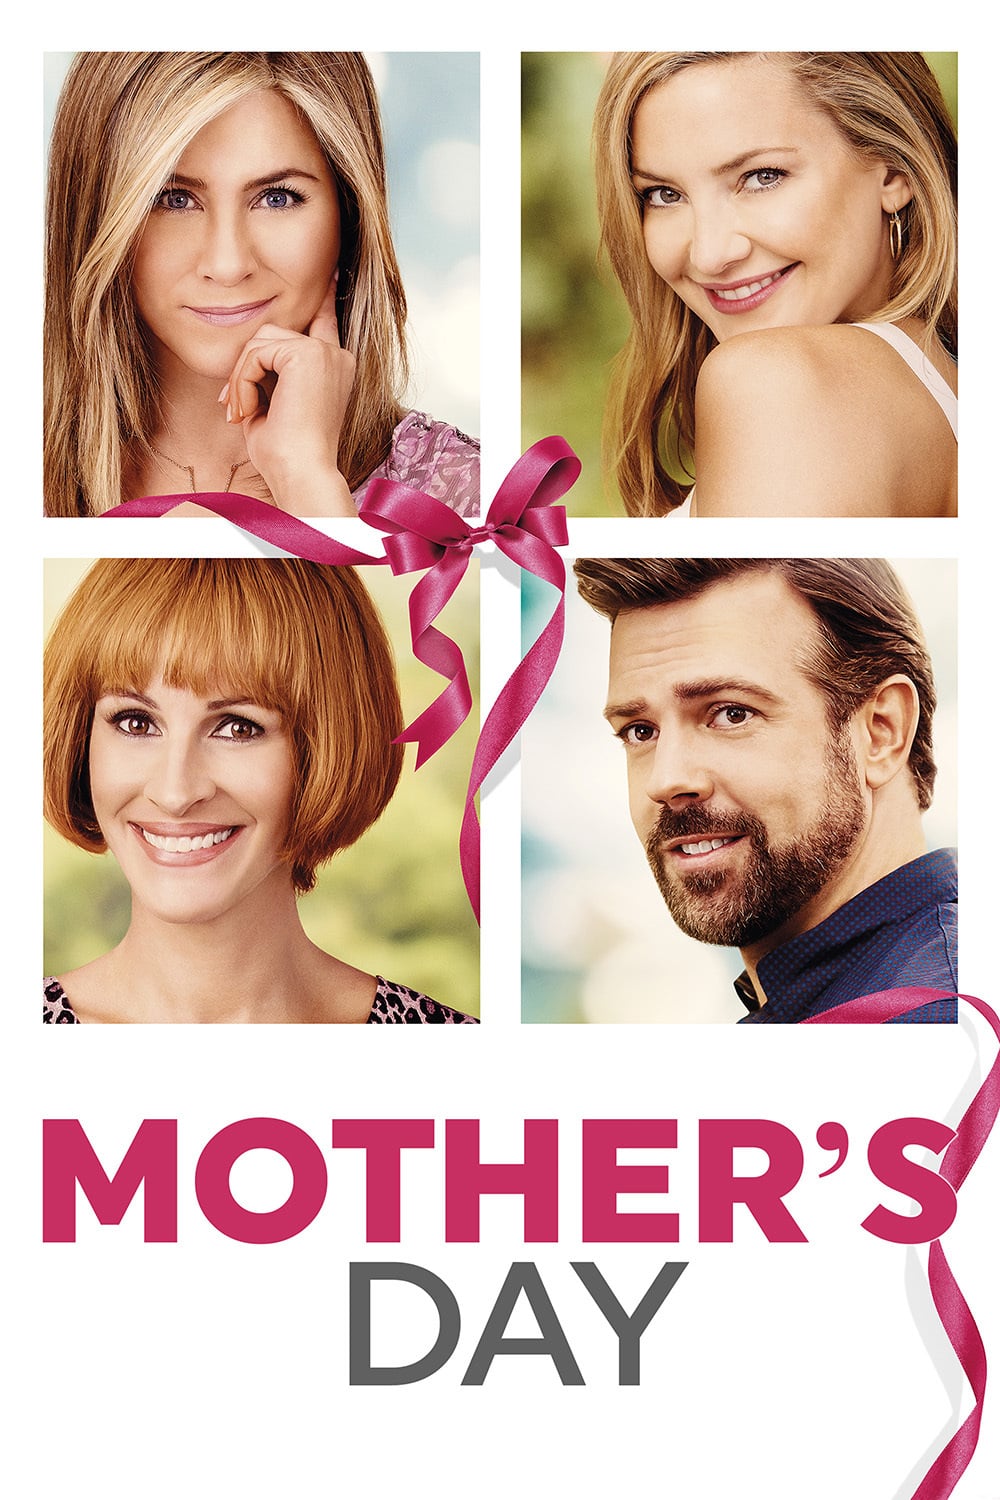 Poster for the movie "Mother's Day"